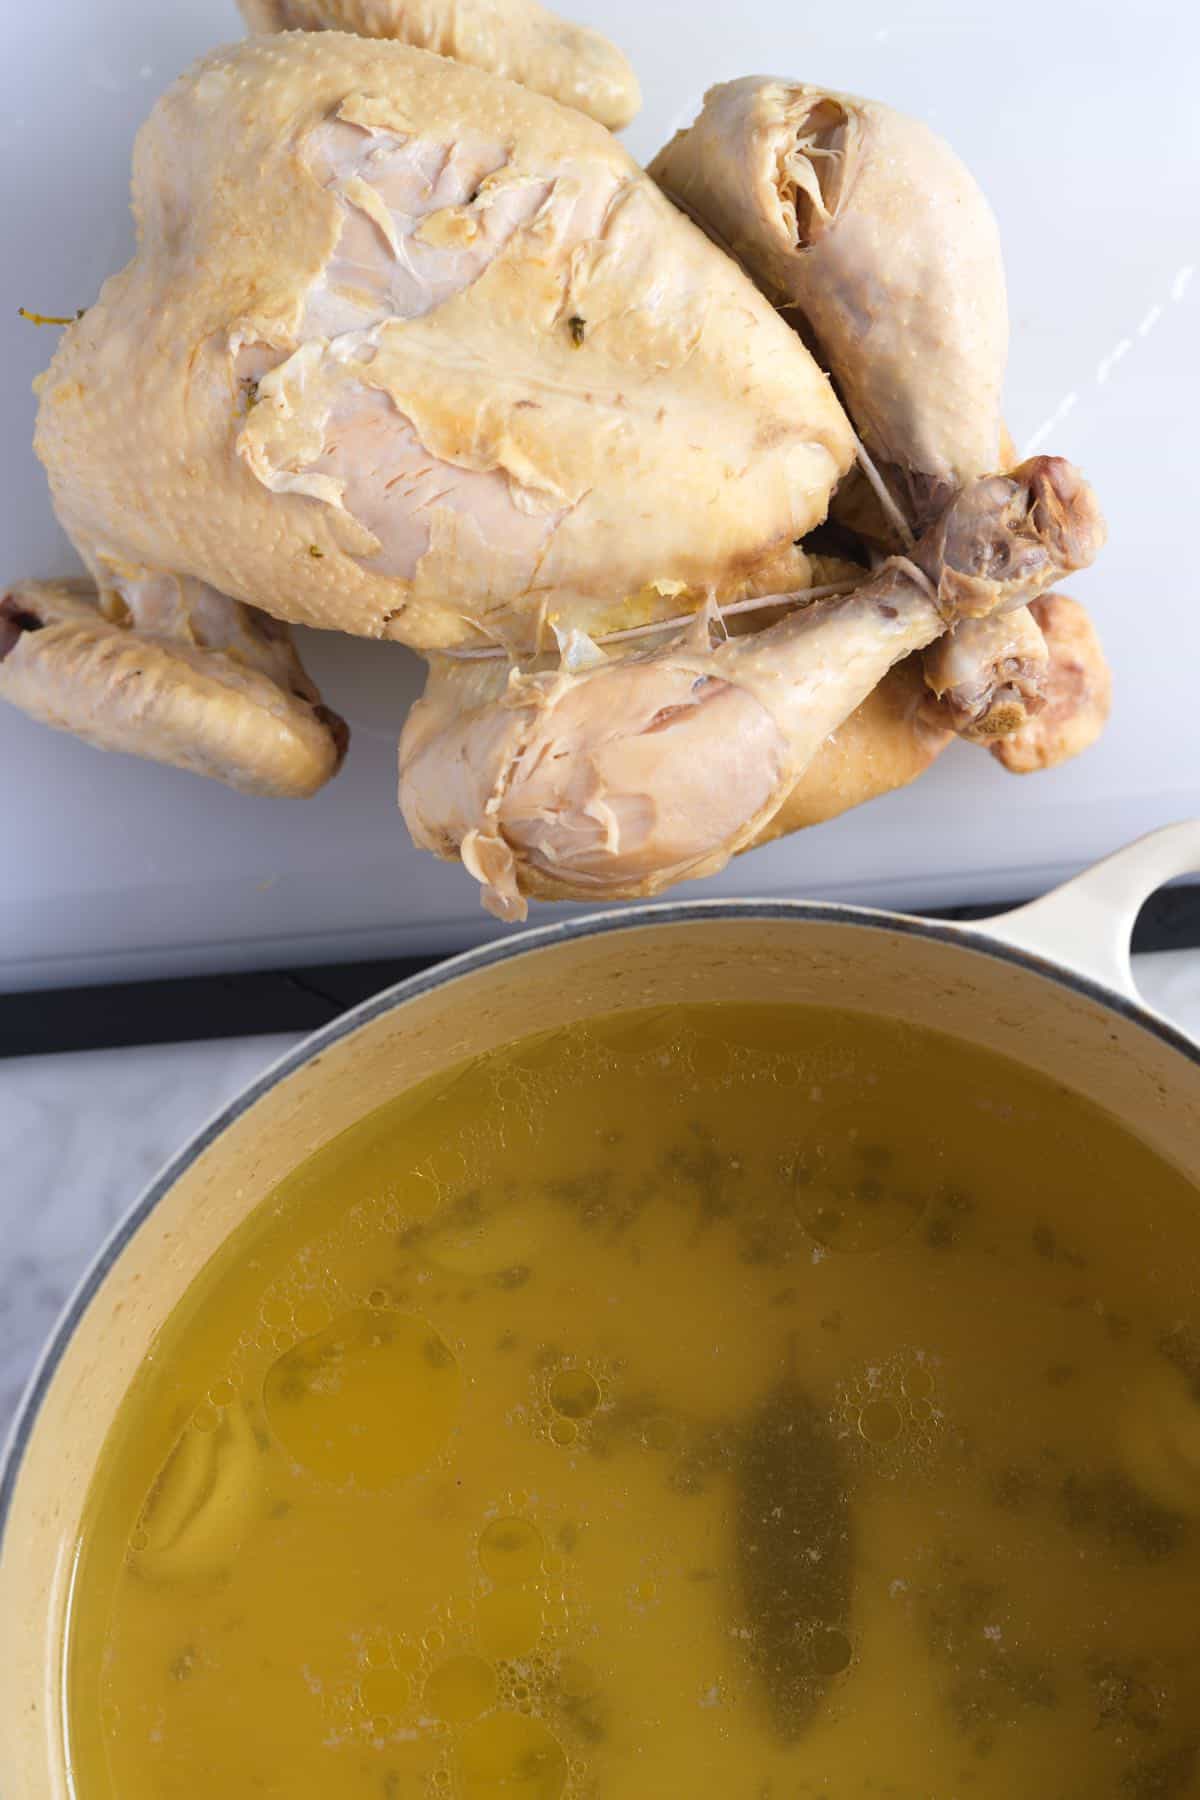 Poached chicken and broth.